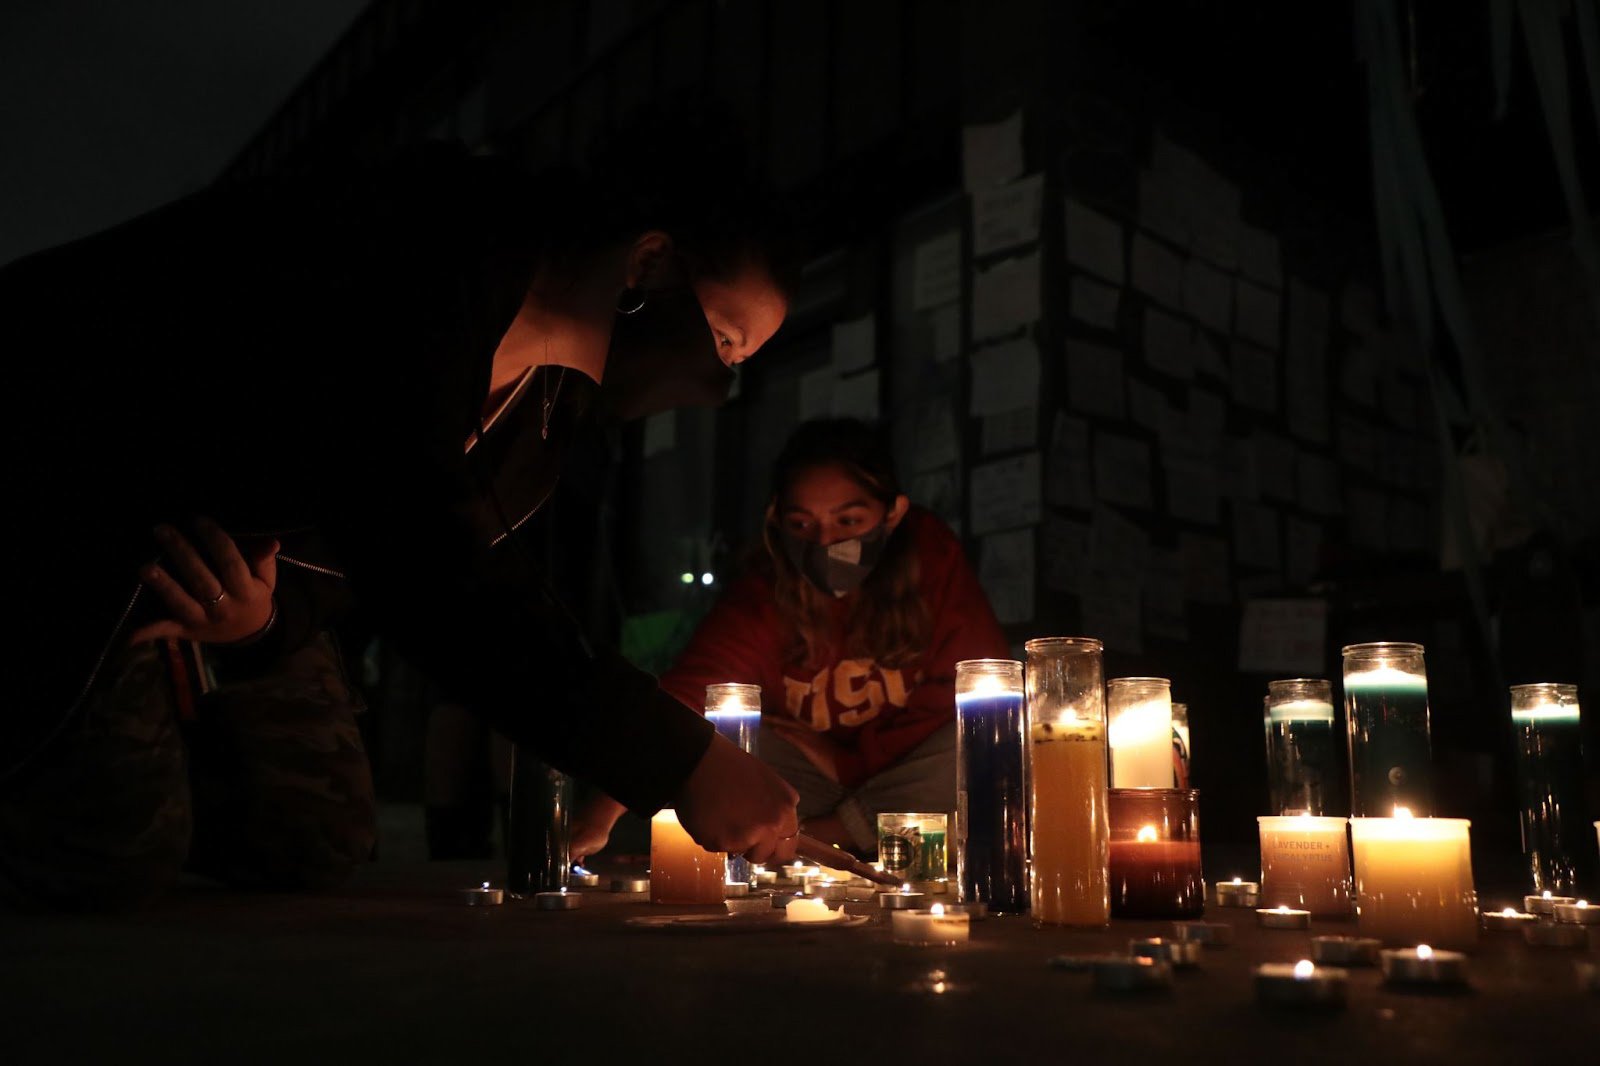  Two USC students light candles outside of the Sigma Nu fraternity house on October 22, 2021. The vigil was held for victims of sexual assualt after the Sigma Nu house was suspended for numerous reports of sexual assault at the house. (Photo by Yanni